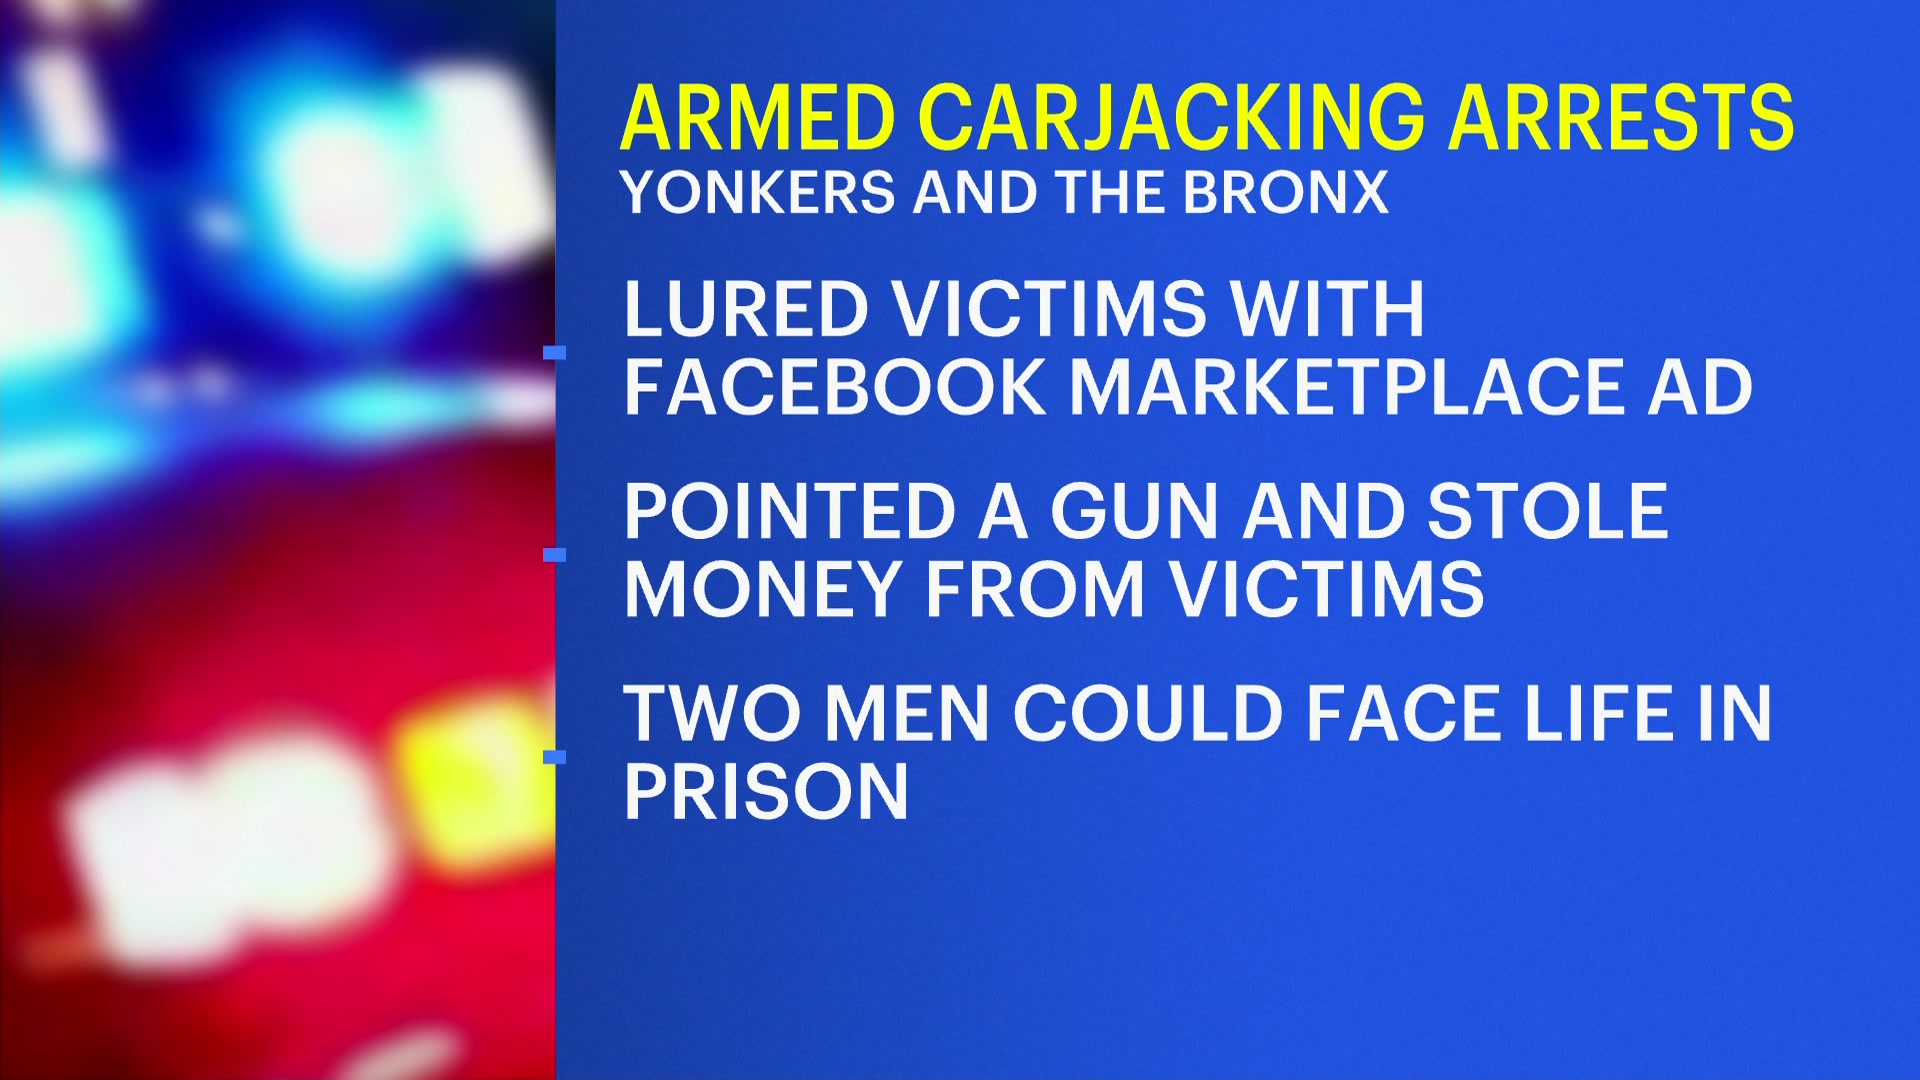 US attorney: Bronx men face life in prison for carjackings in Bronx and Yonkers